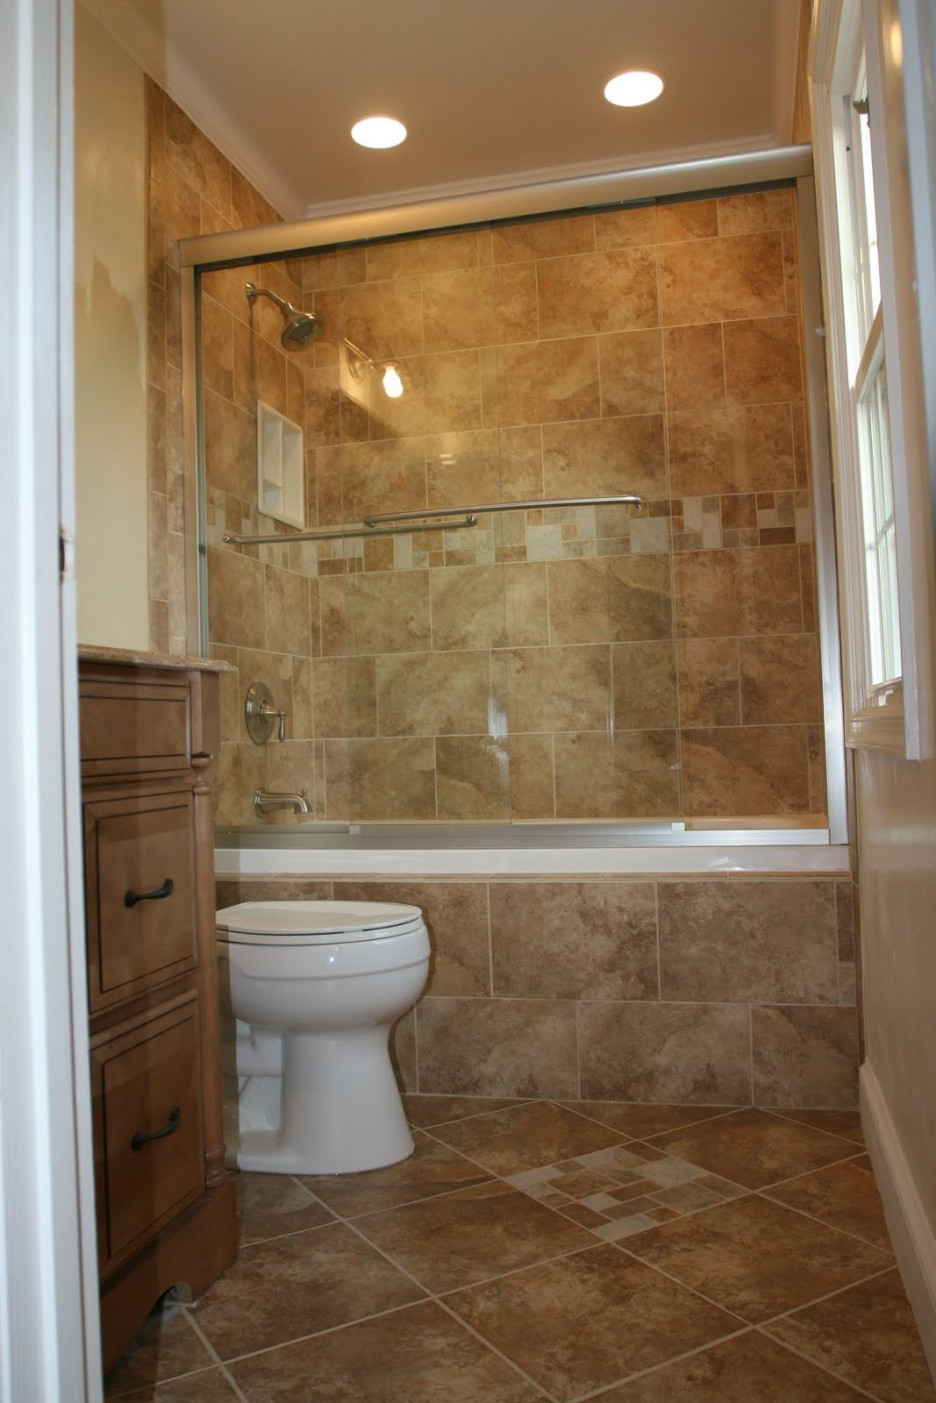 Bathroom Shower Tile Gallery
 33 amazing pictures and ideas of old fashioned bathroom